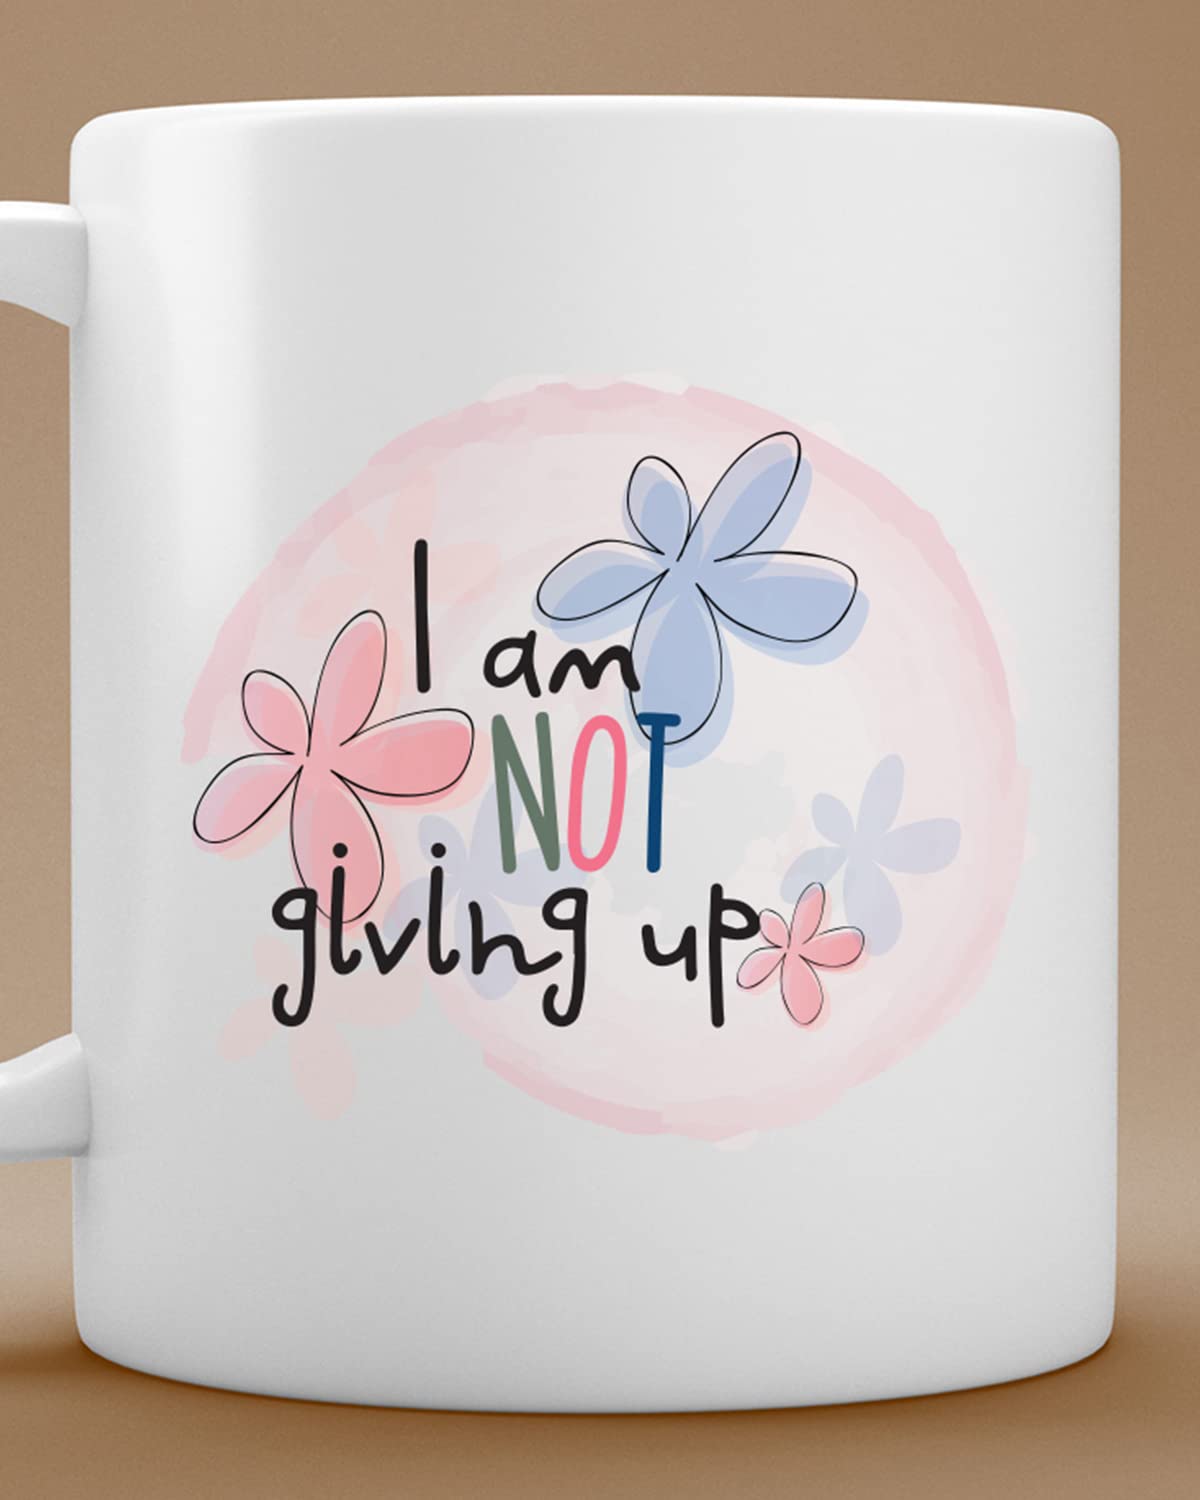 I Am Not Giving Up Coffee Mug | Romantic Printed Coffee Mug for Birthday,Anniversary Gift,Valentine's Day Gift, for Someone Special Inspirational Thoughts